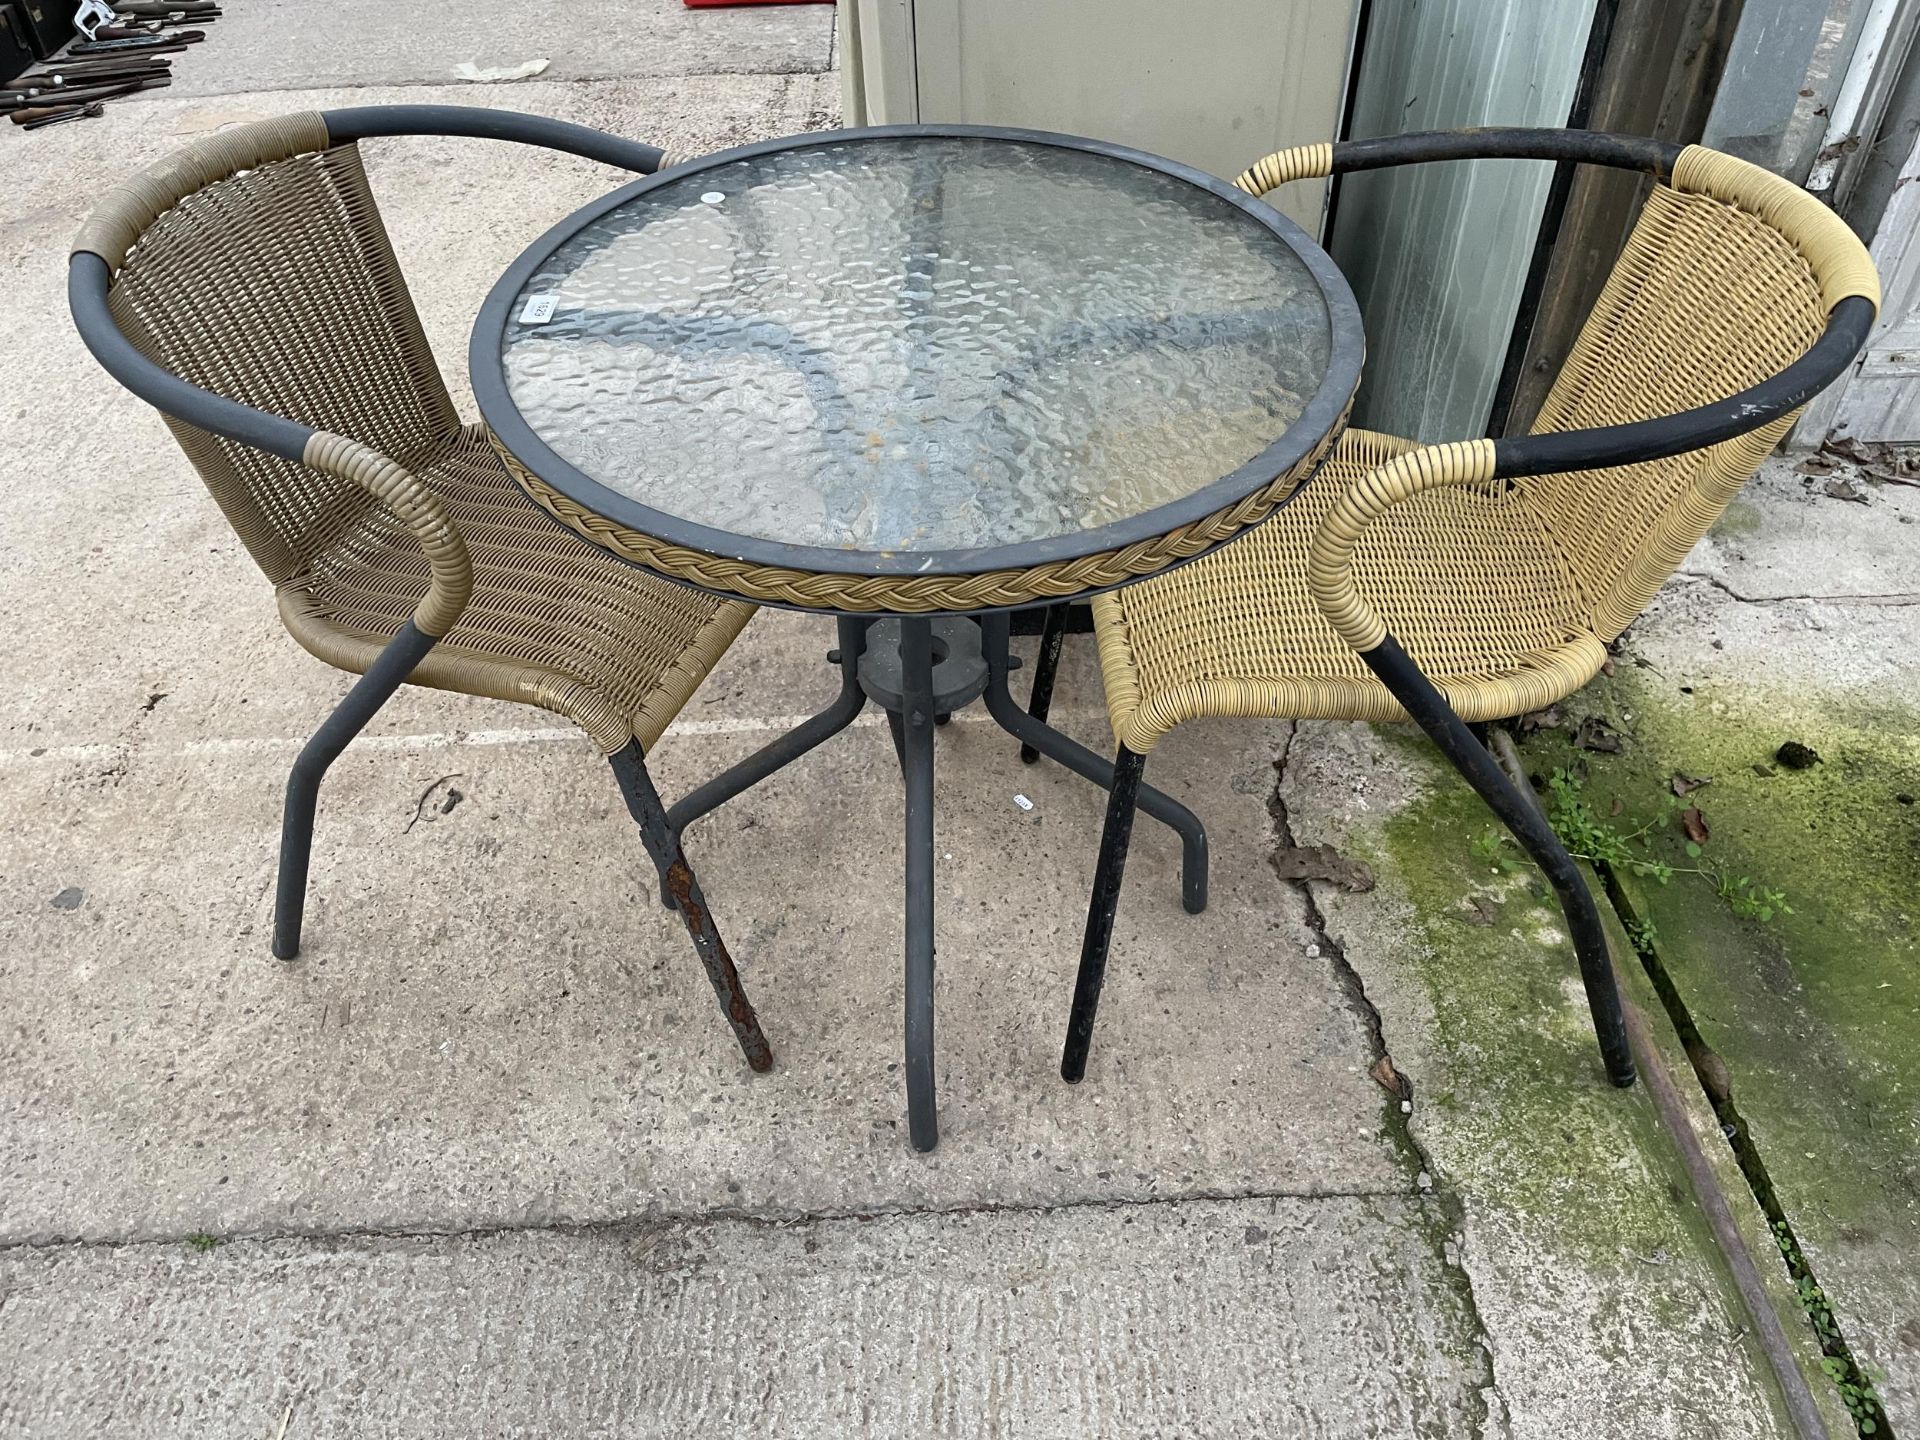 A GLASS TOPPED BISTRO TABLE AND TWO RATTAN EFFECT CHAIRS